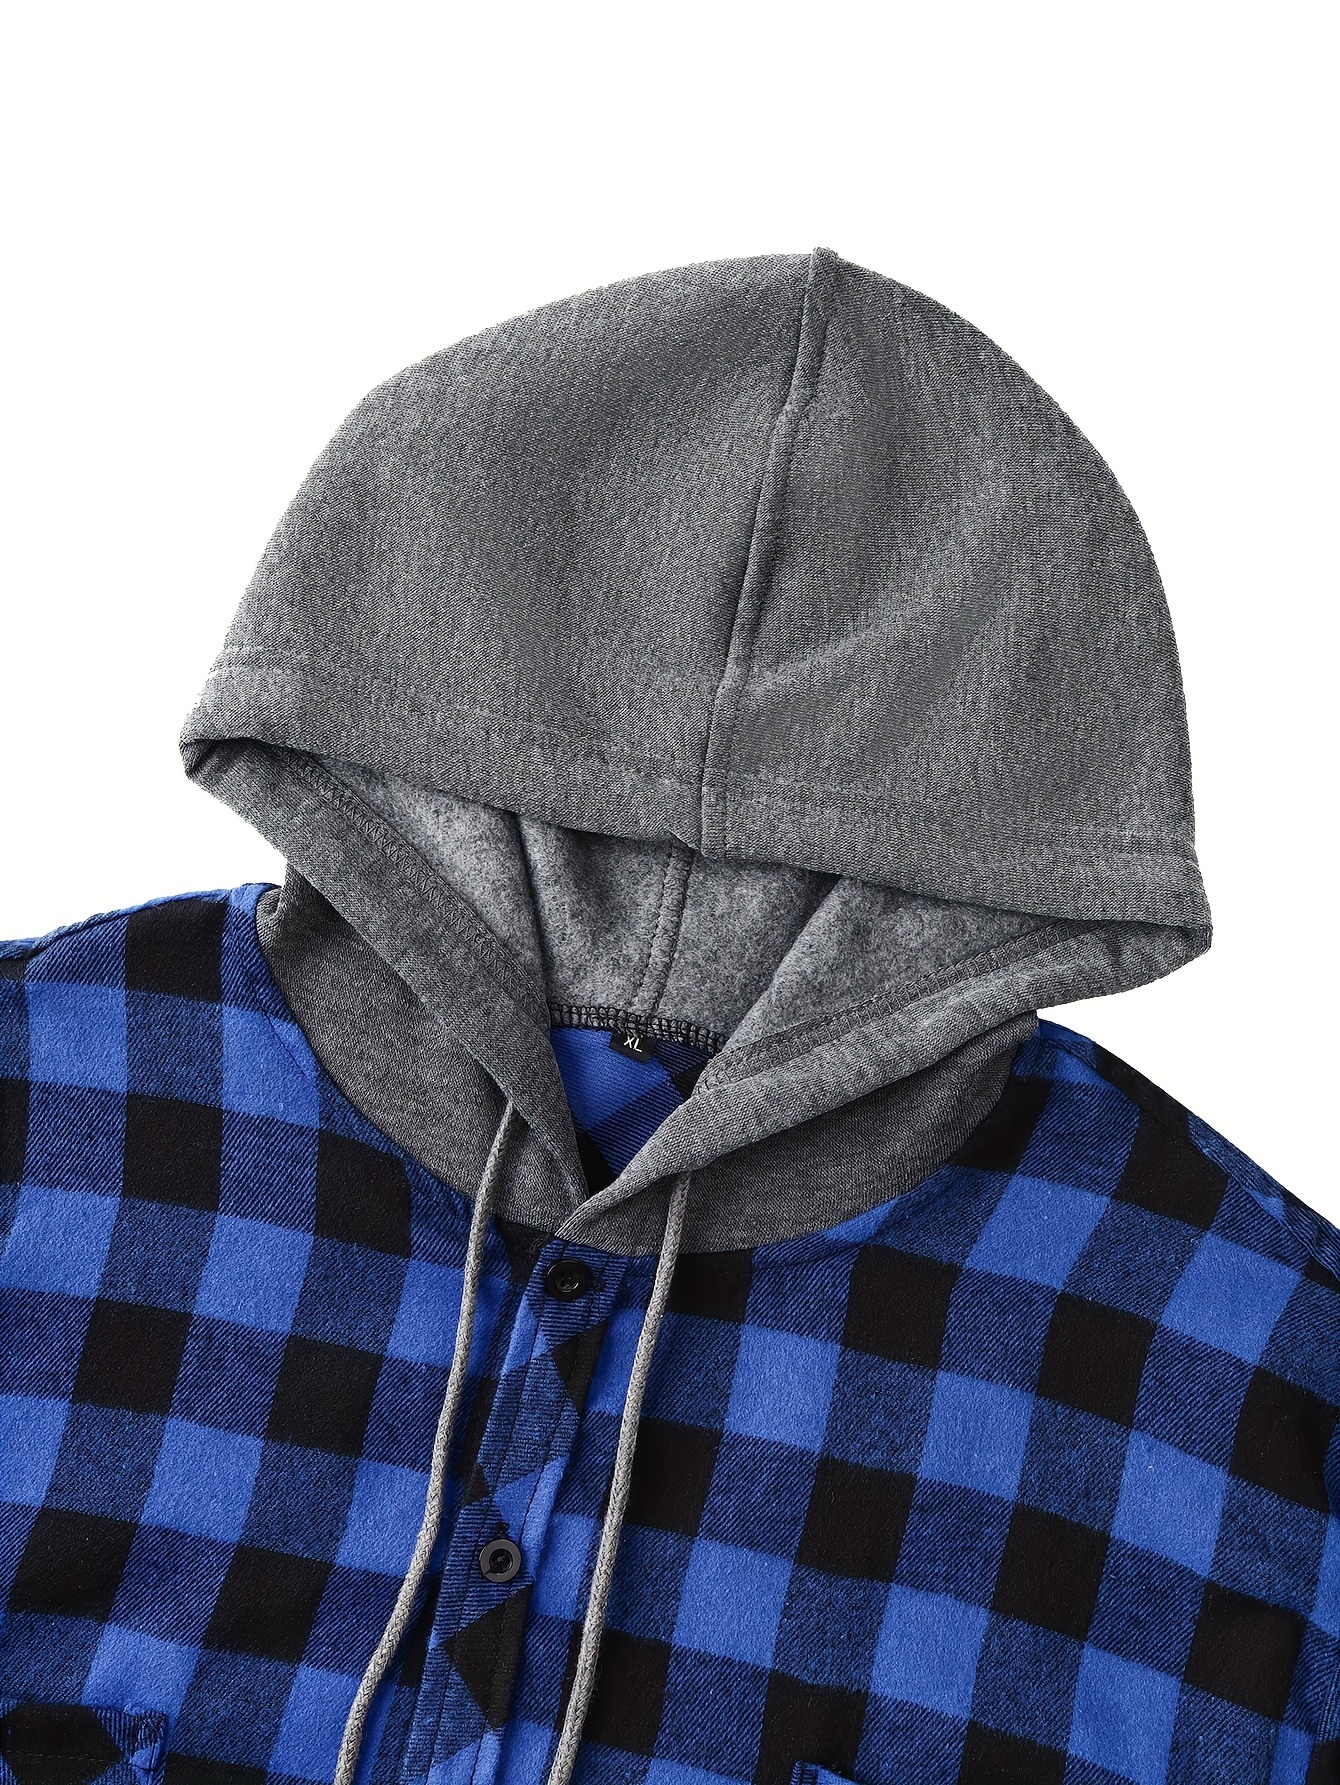 long sleeve casual regular fit button up hooded shirts jacket plaid shirt coat for men details 43